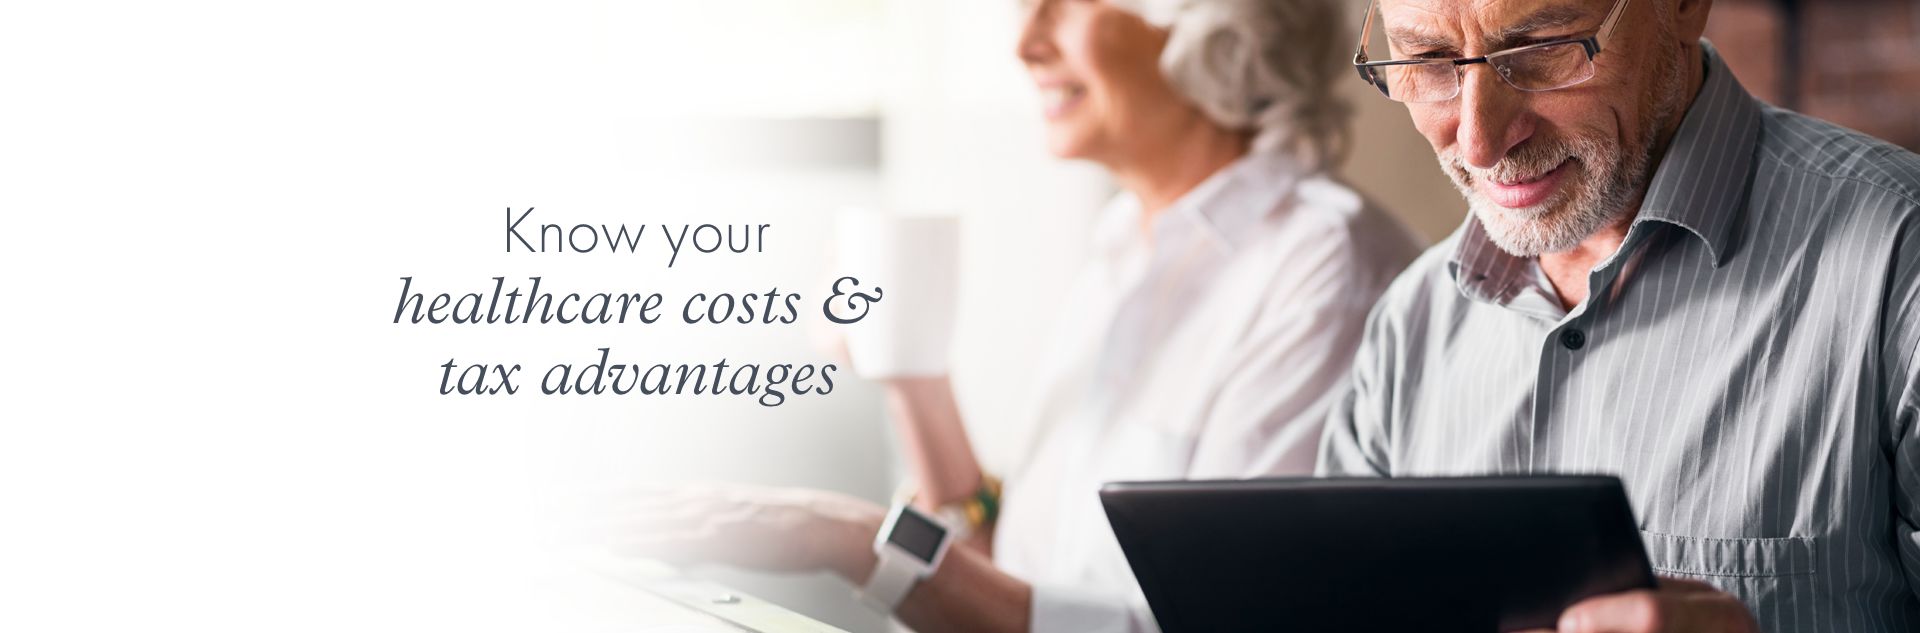 Know your healthcare costs & tax advantages 